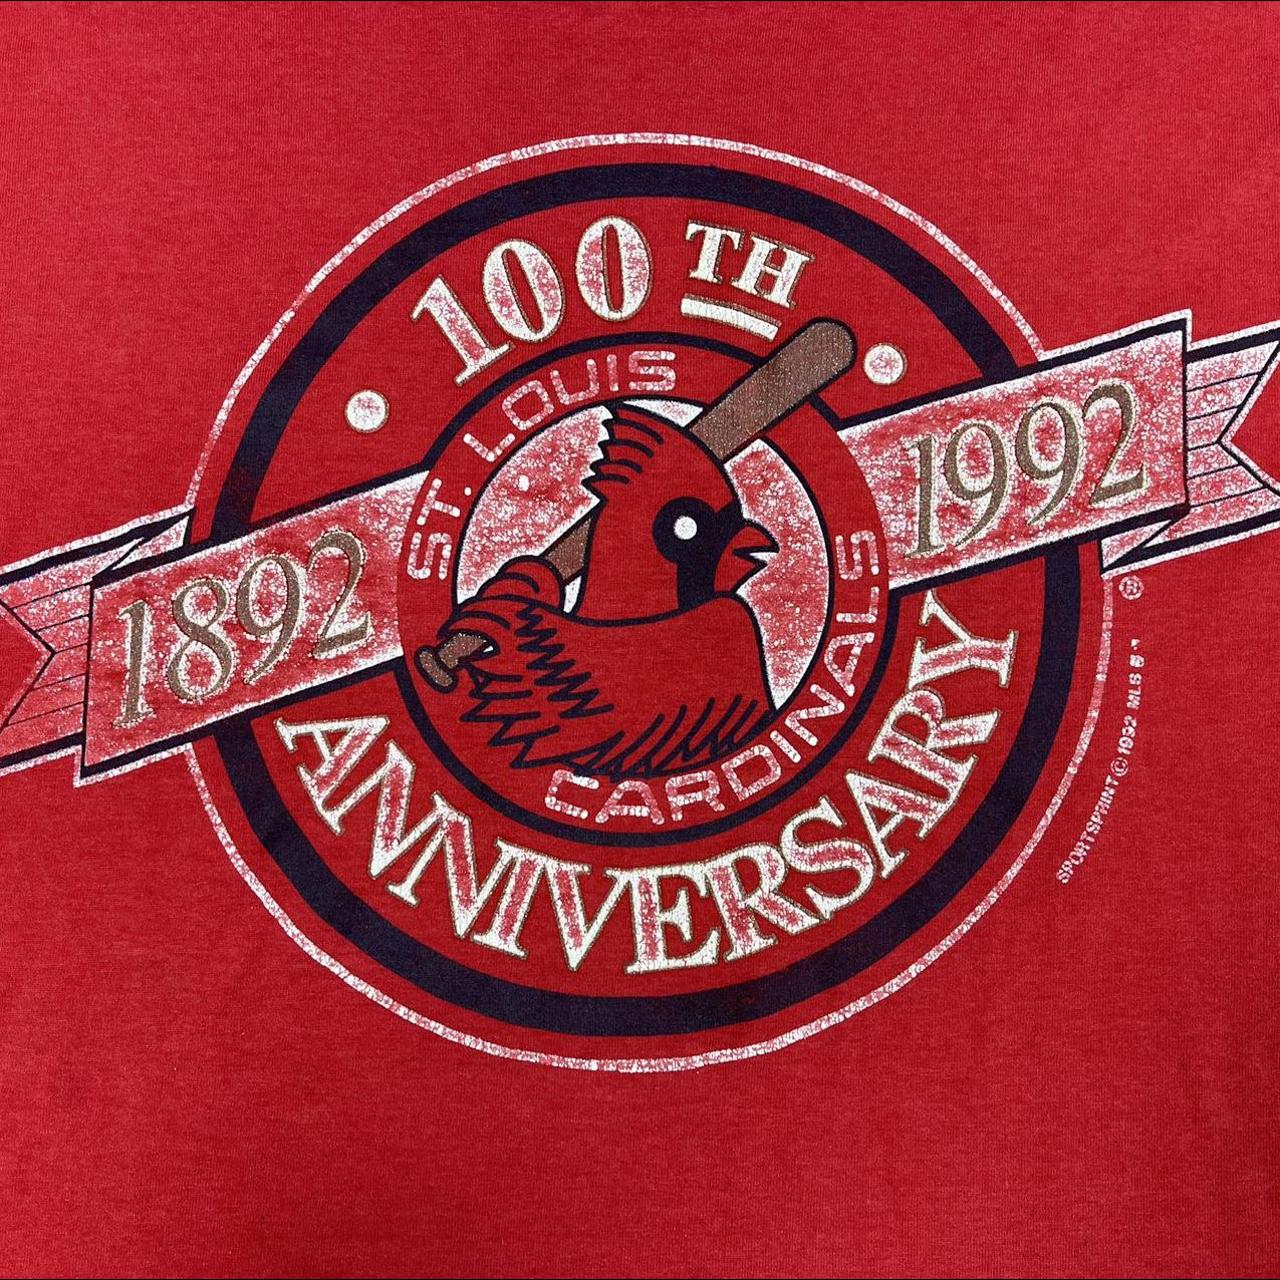 Vintage 1992 St Louis Cardinals 100th Anniversary T-shirt Made in